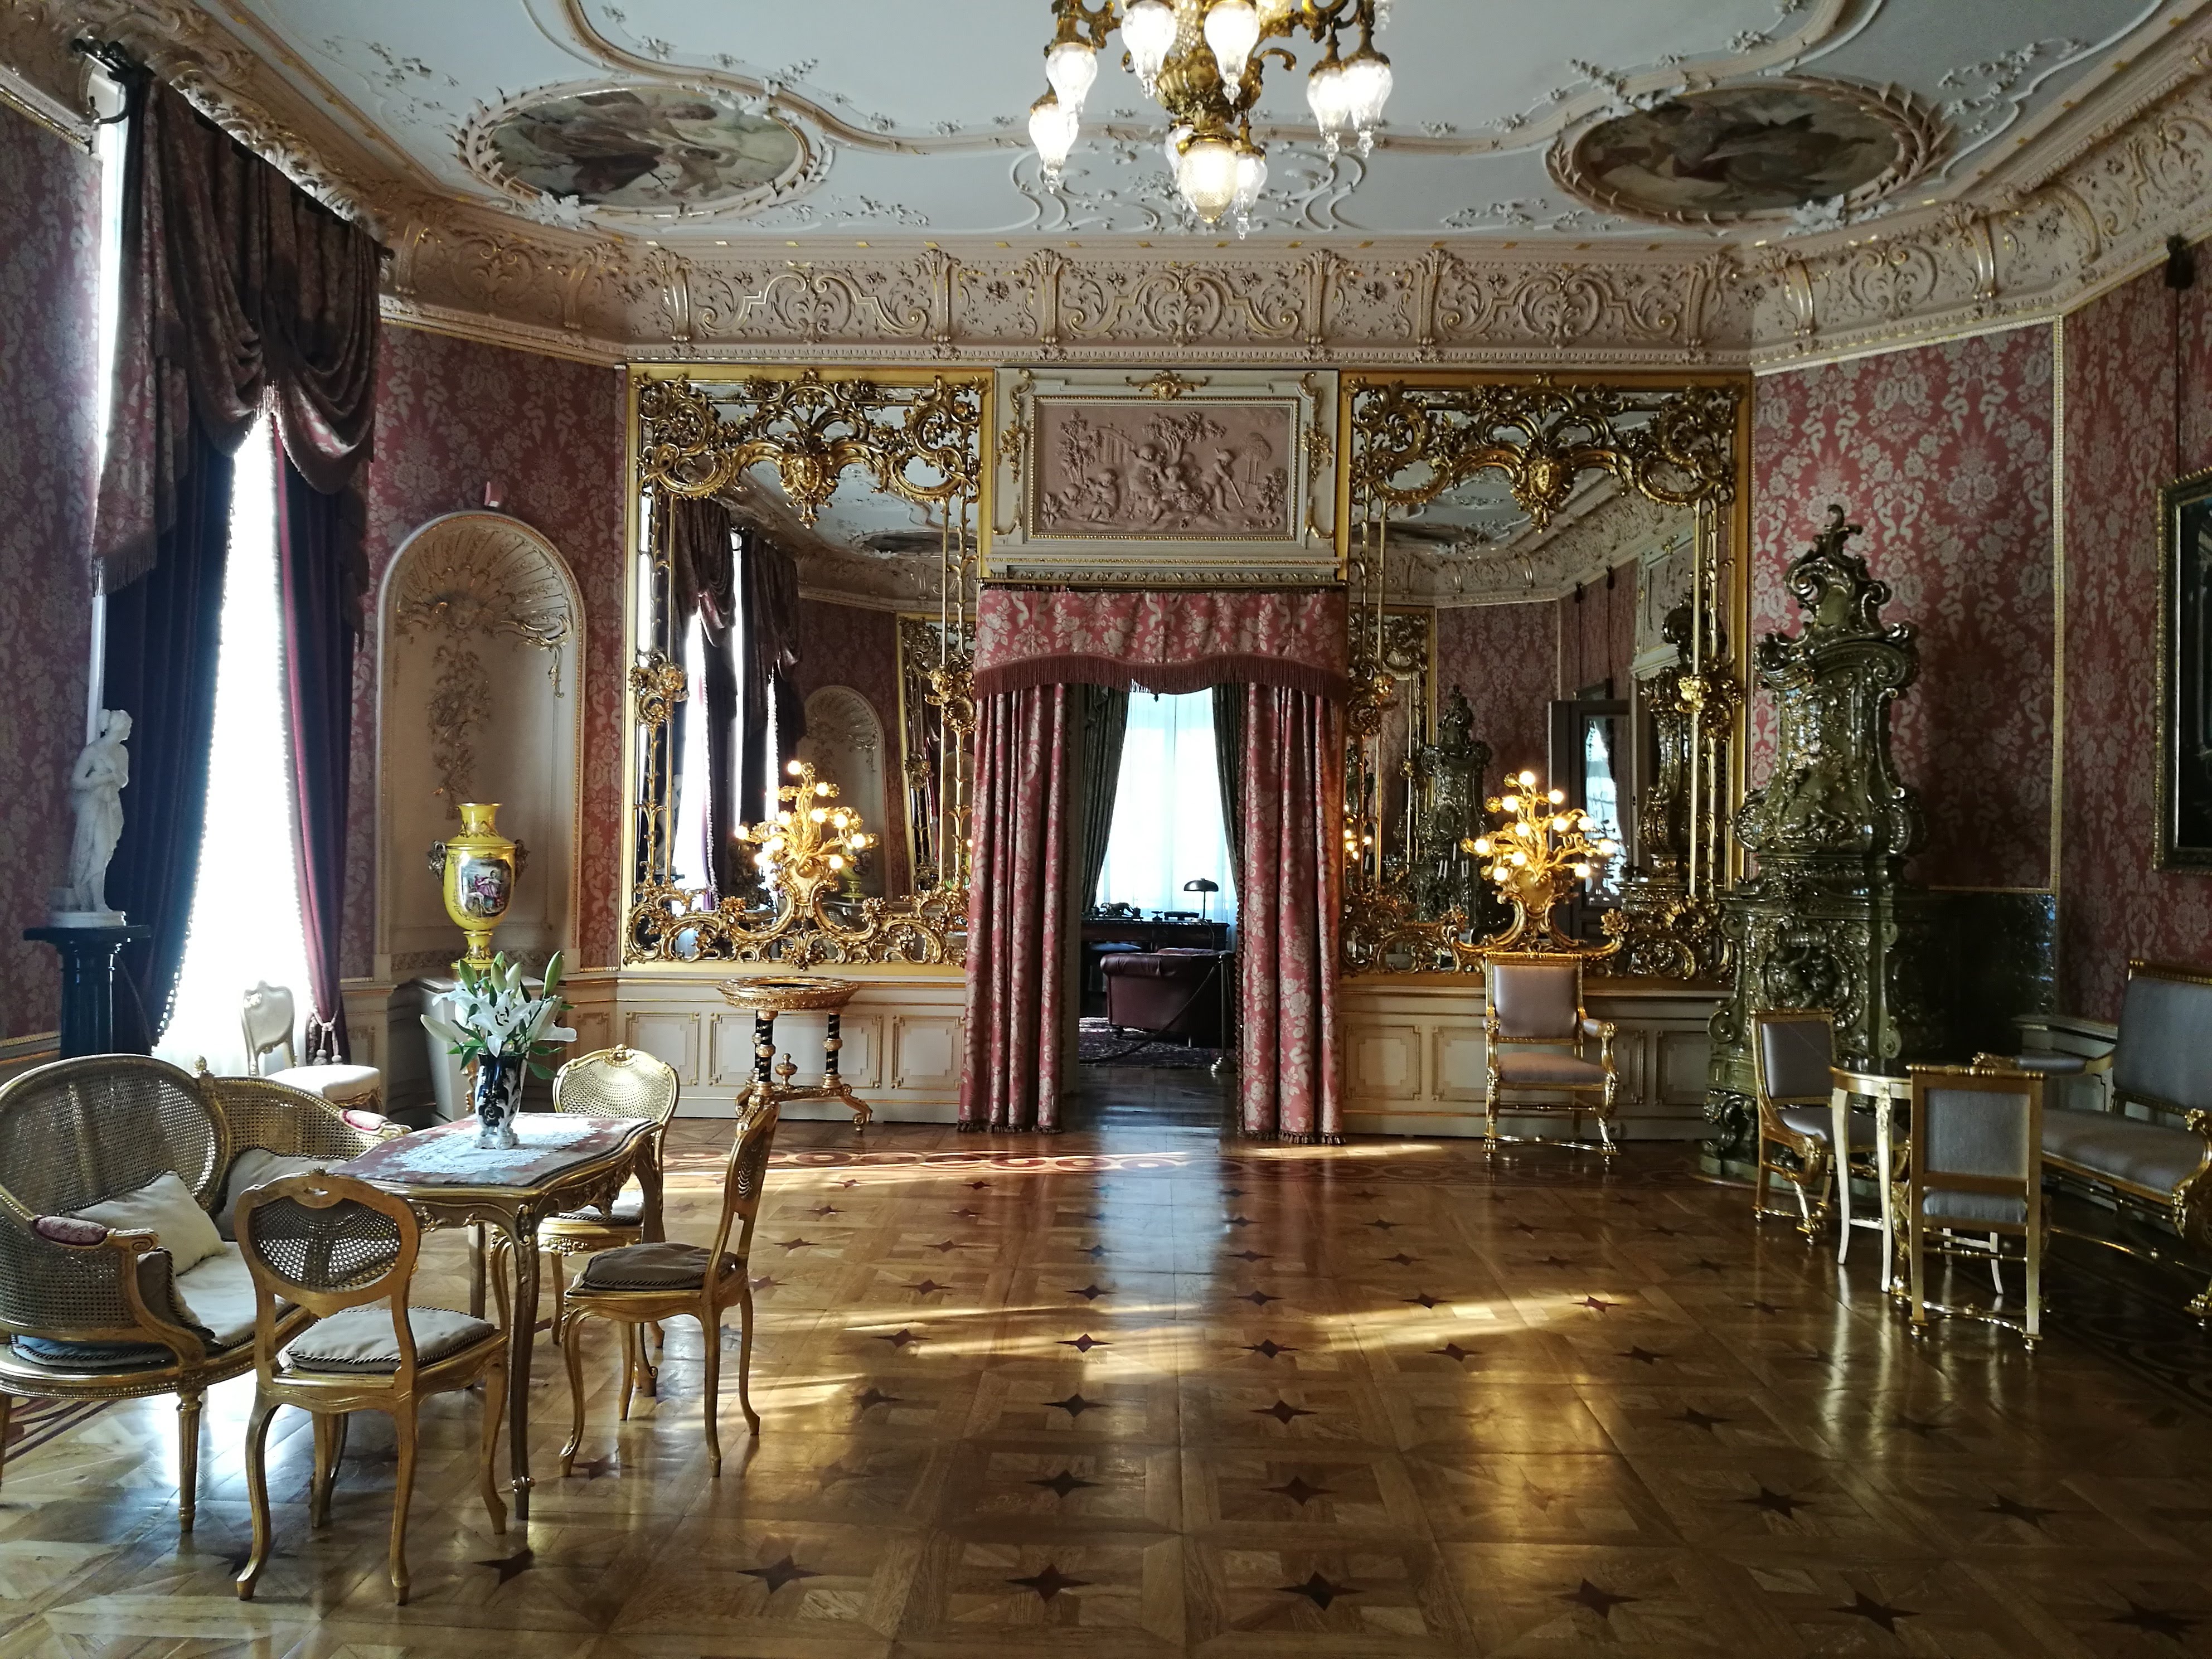 A golden room in Herbst palace